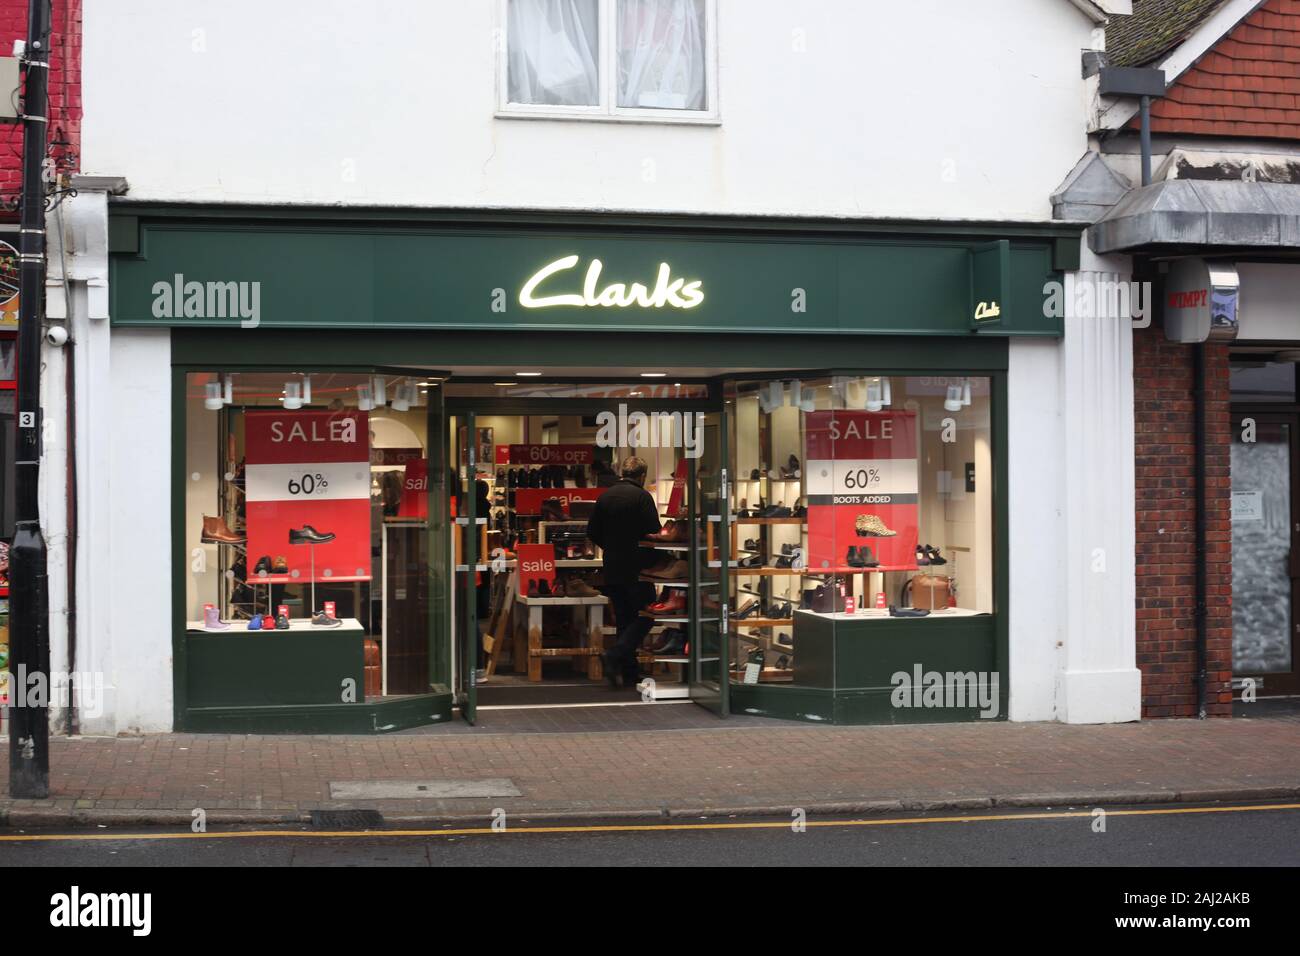 clarks shoes coventry